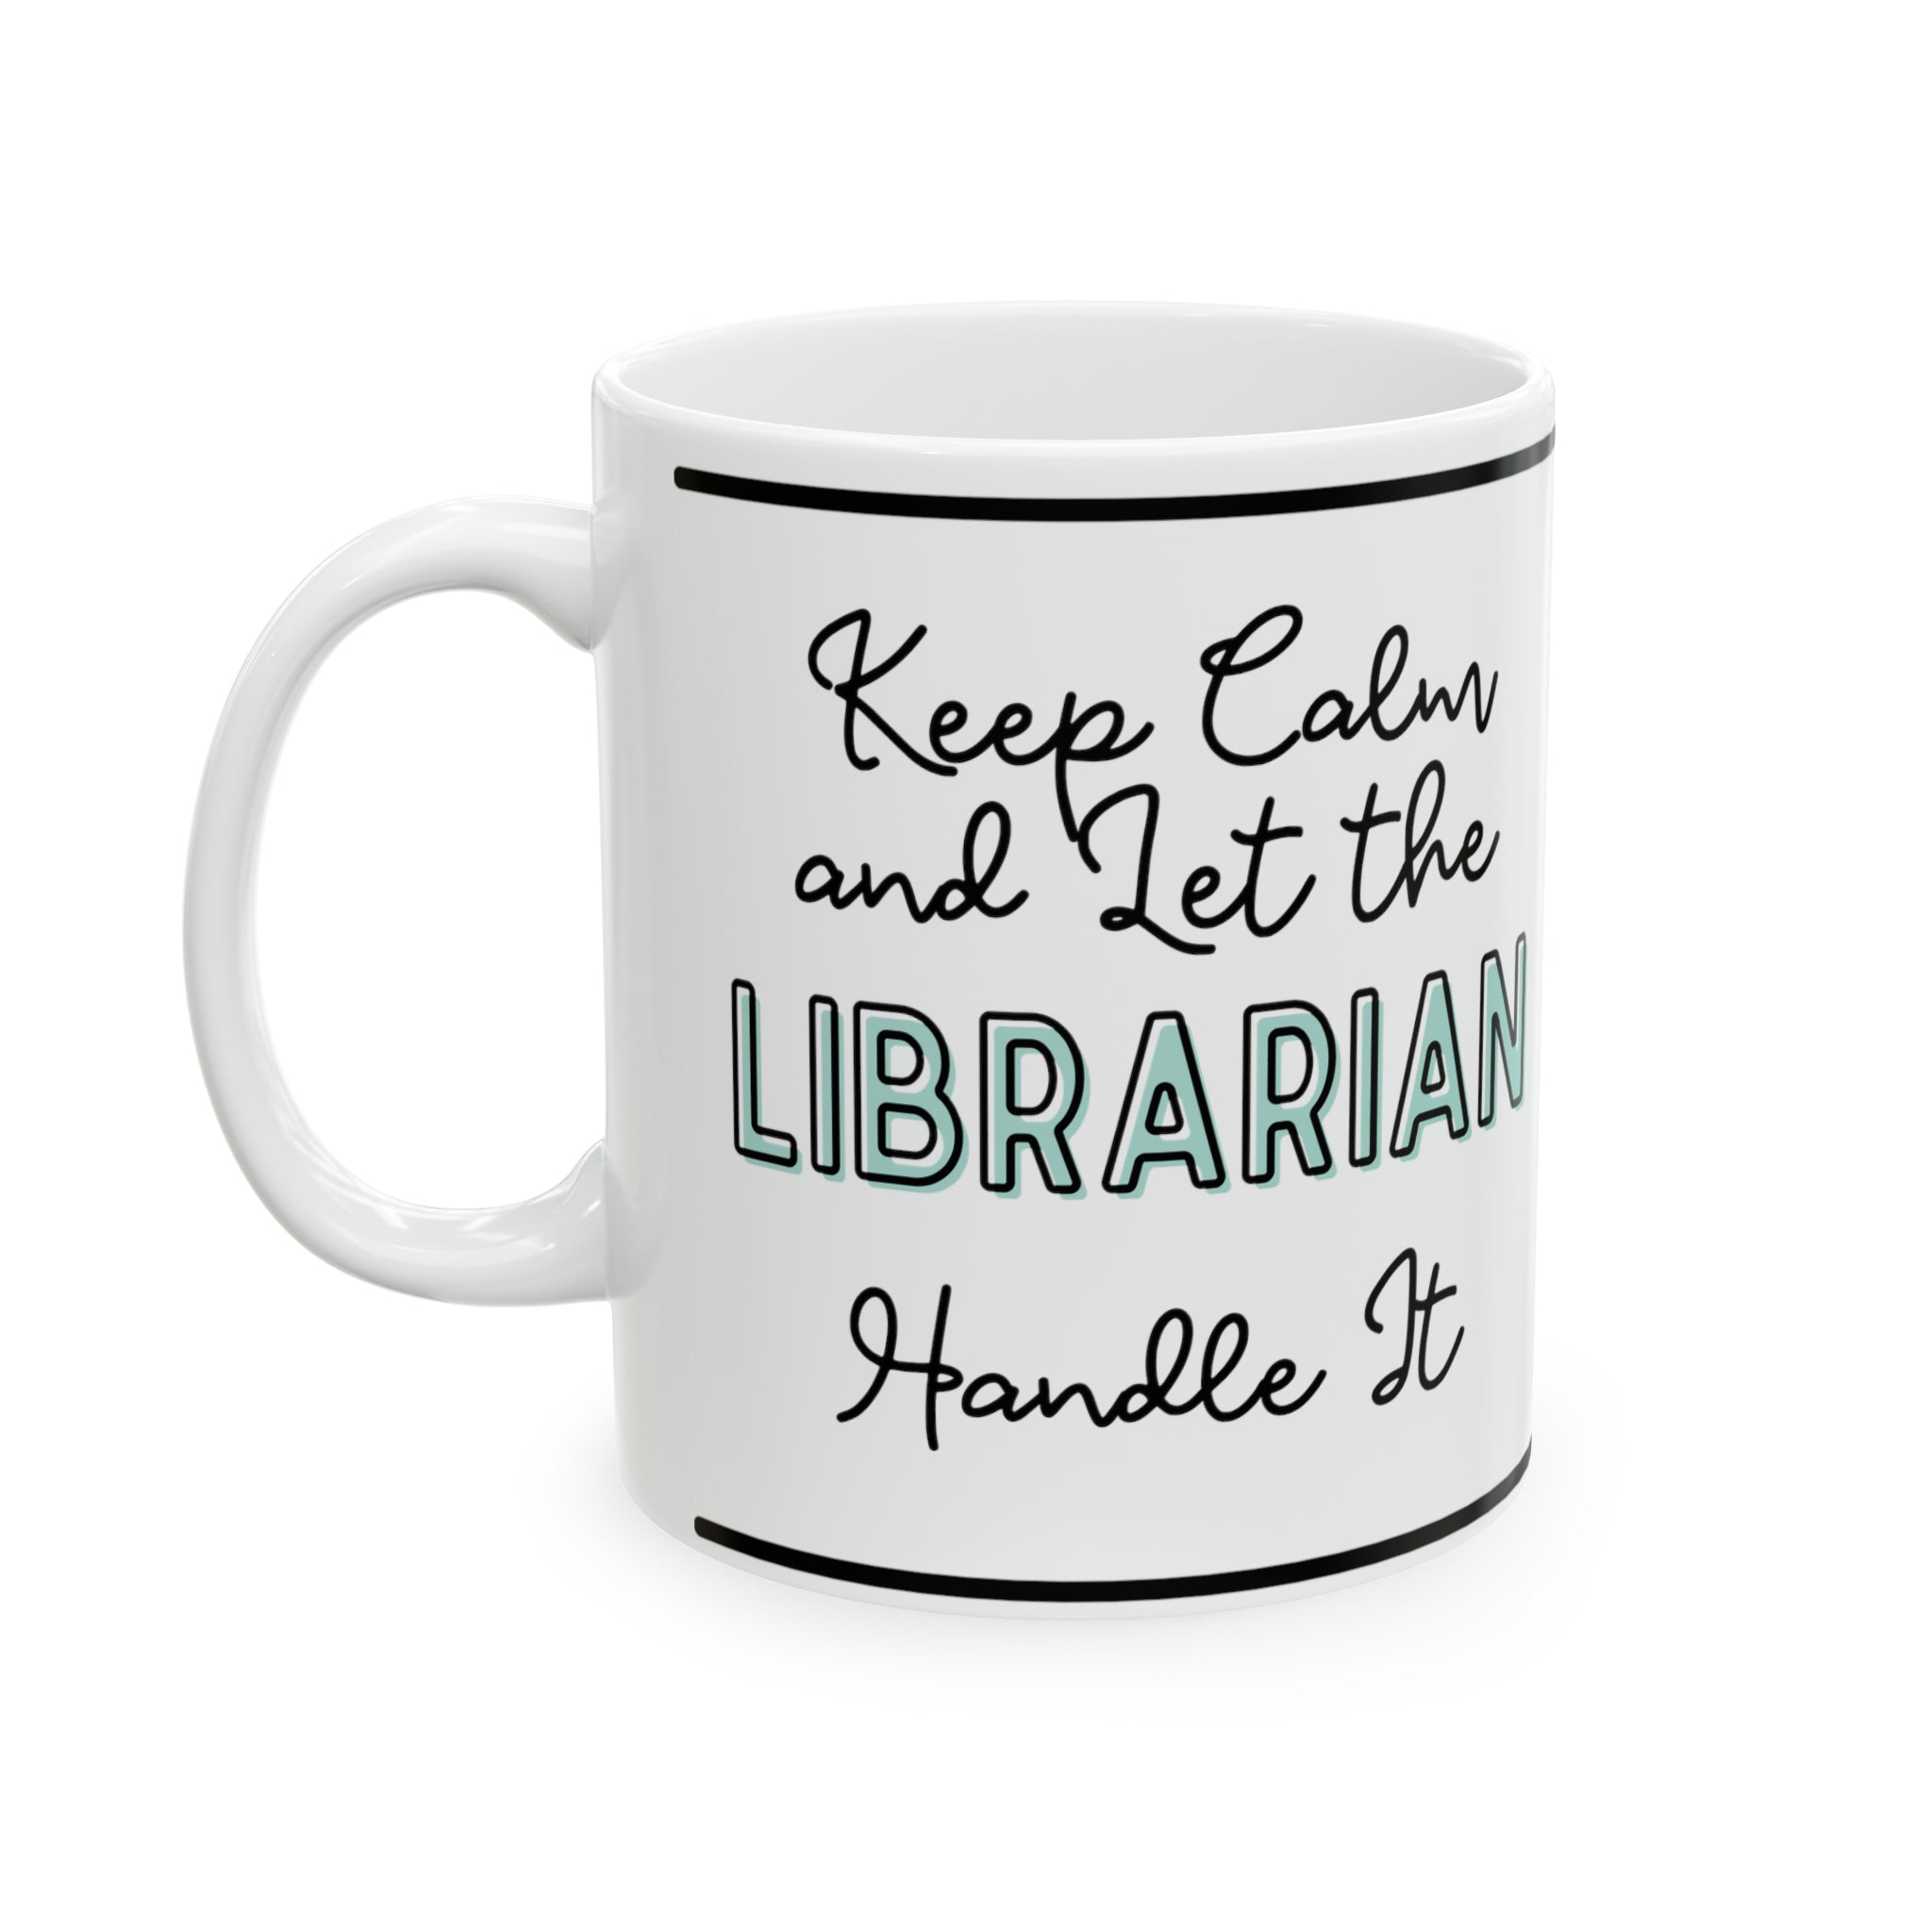 Keep Calm and let the Librarian Handle It - Ceramic Mug, 11oz